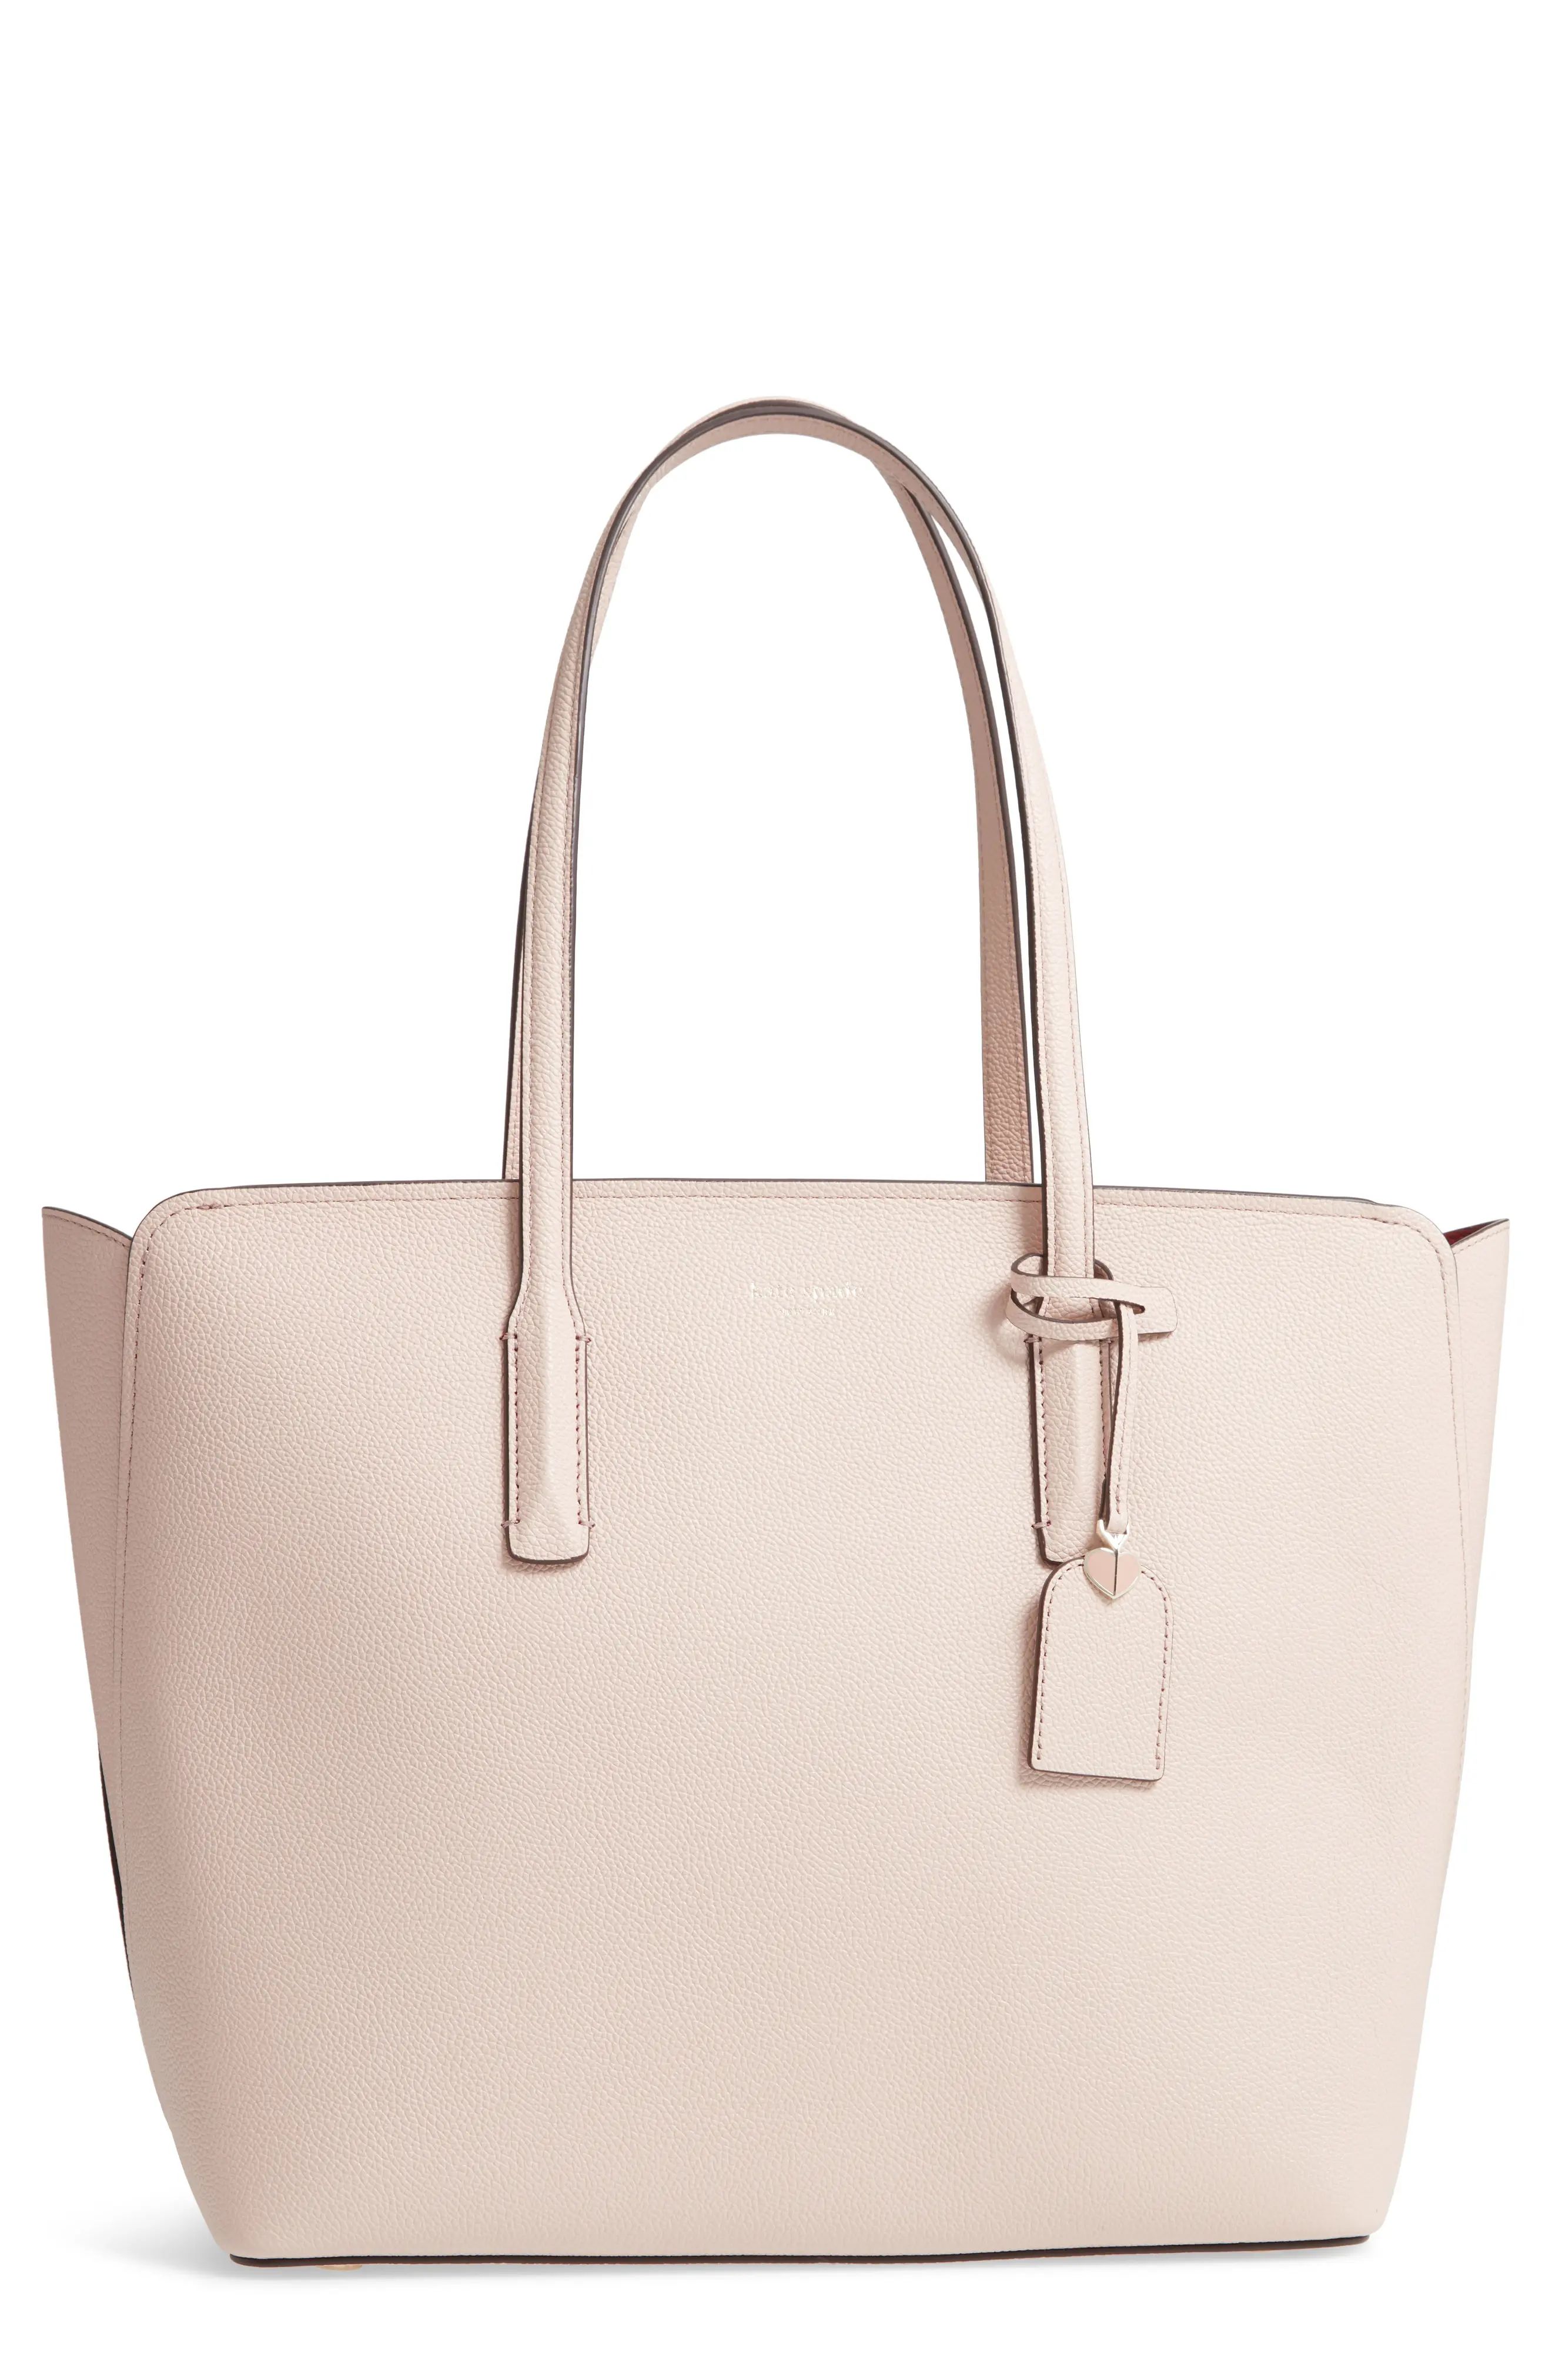 kate spade new york large margaux leather tote | Nordstrom